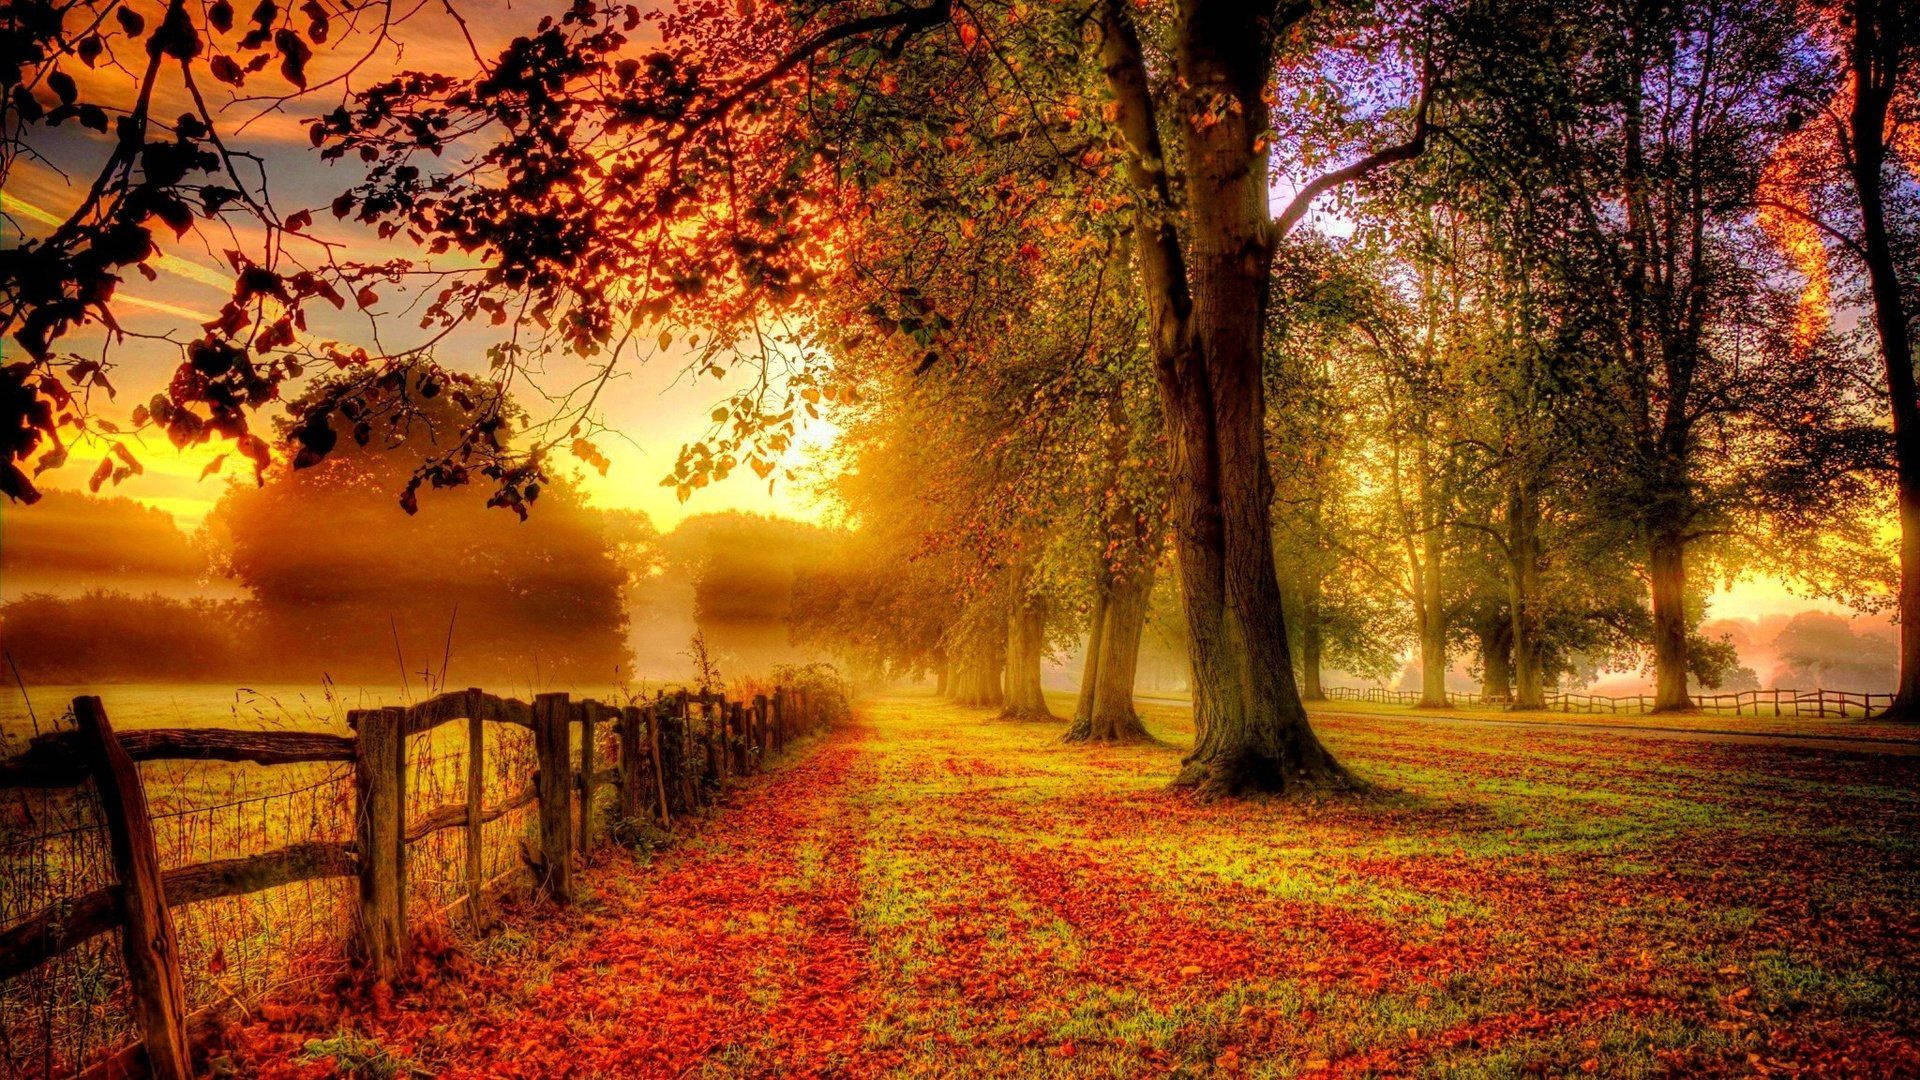 A Beautiful Country Road Illuminated by a Vibrant Autumn Sunset Wallpaper